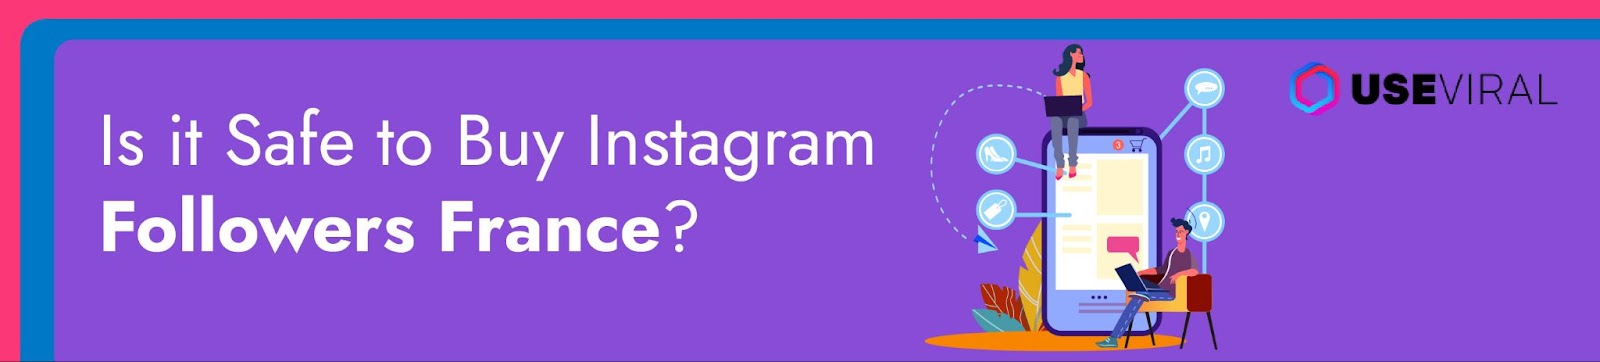 Is it Safe to Buy Instagram Followers France?